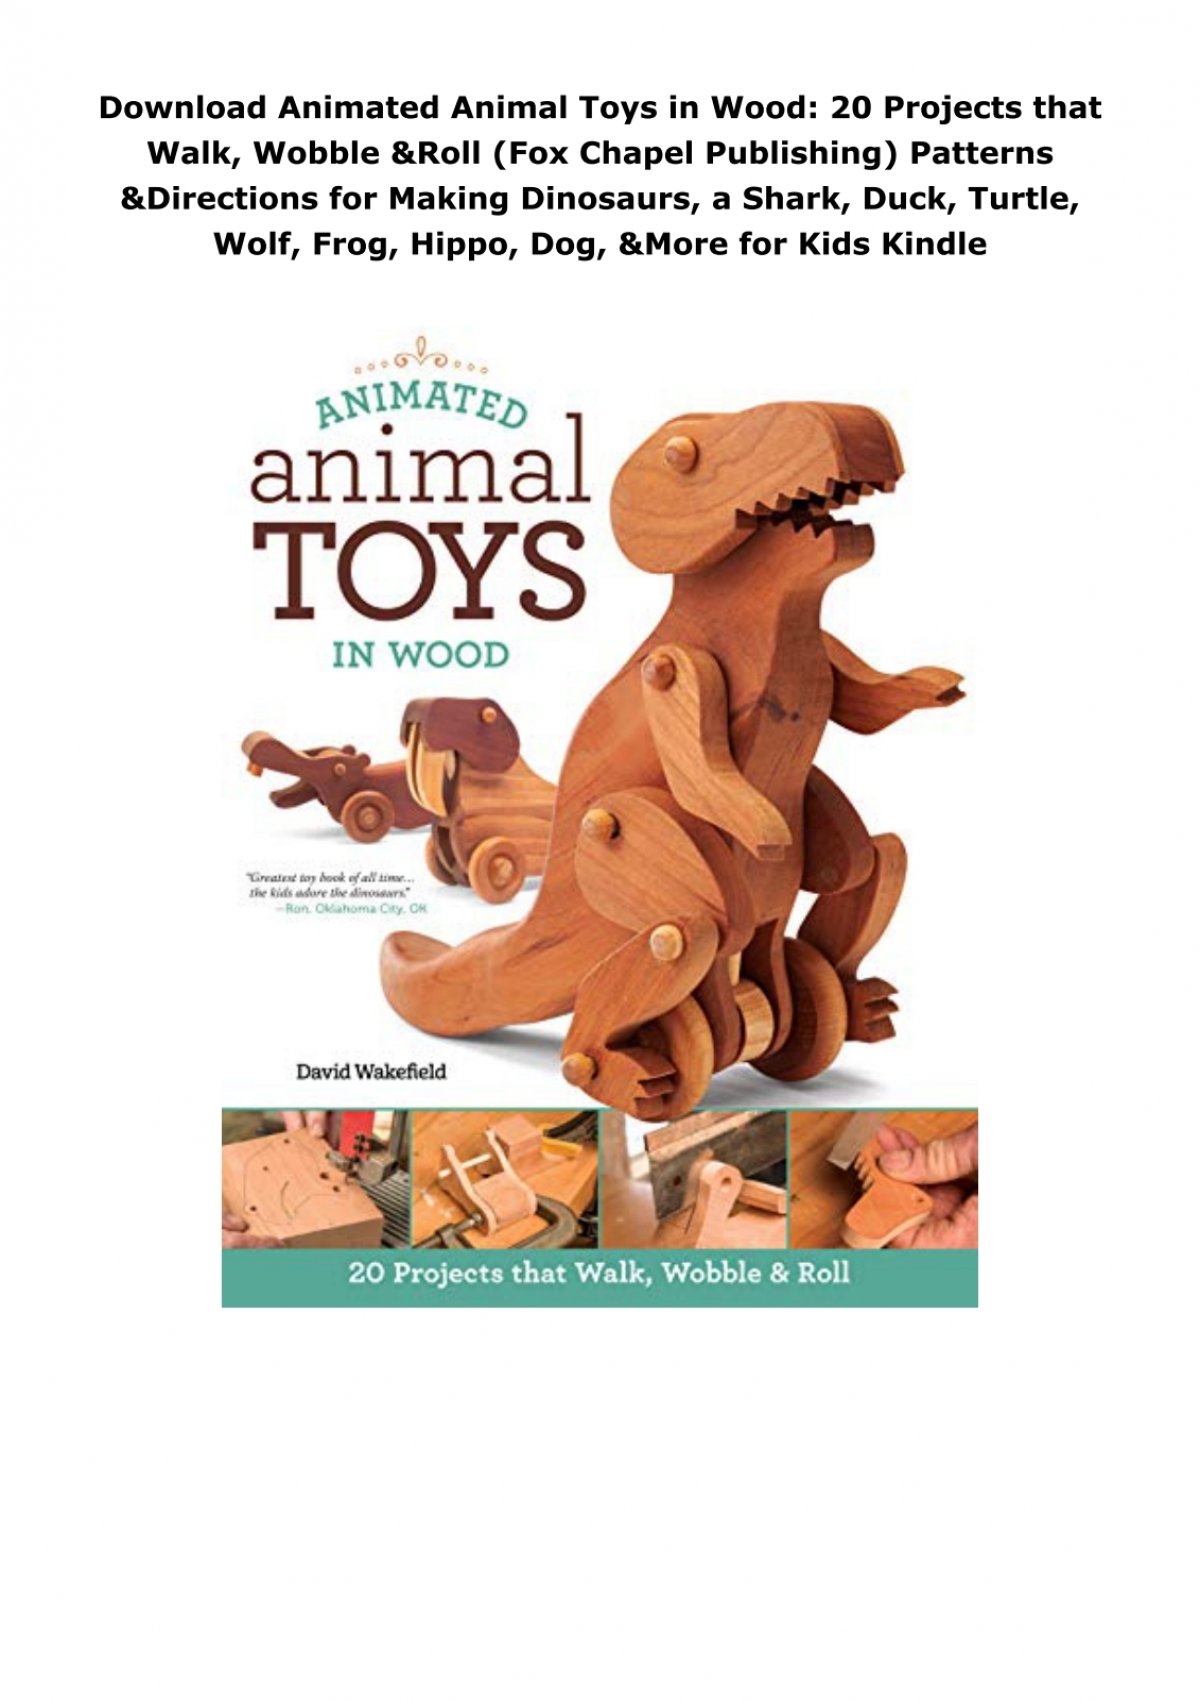 Animated Animal Toys in Wood: 20 Projects that Walk, Wobble & Roll (Fox  Chapel Publishing) Patterns & Directions for Making Dinosaurs, a Shark,  Duck